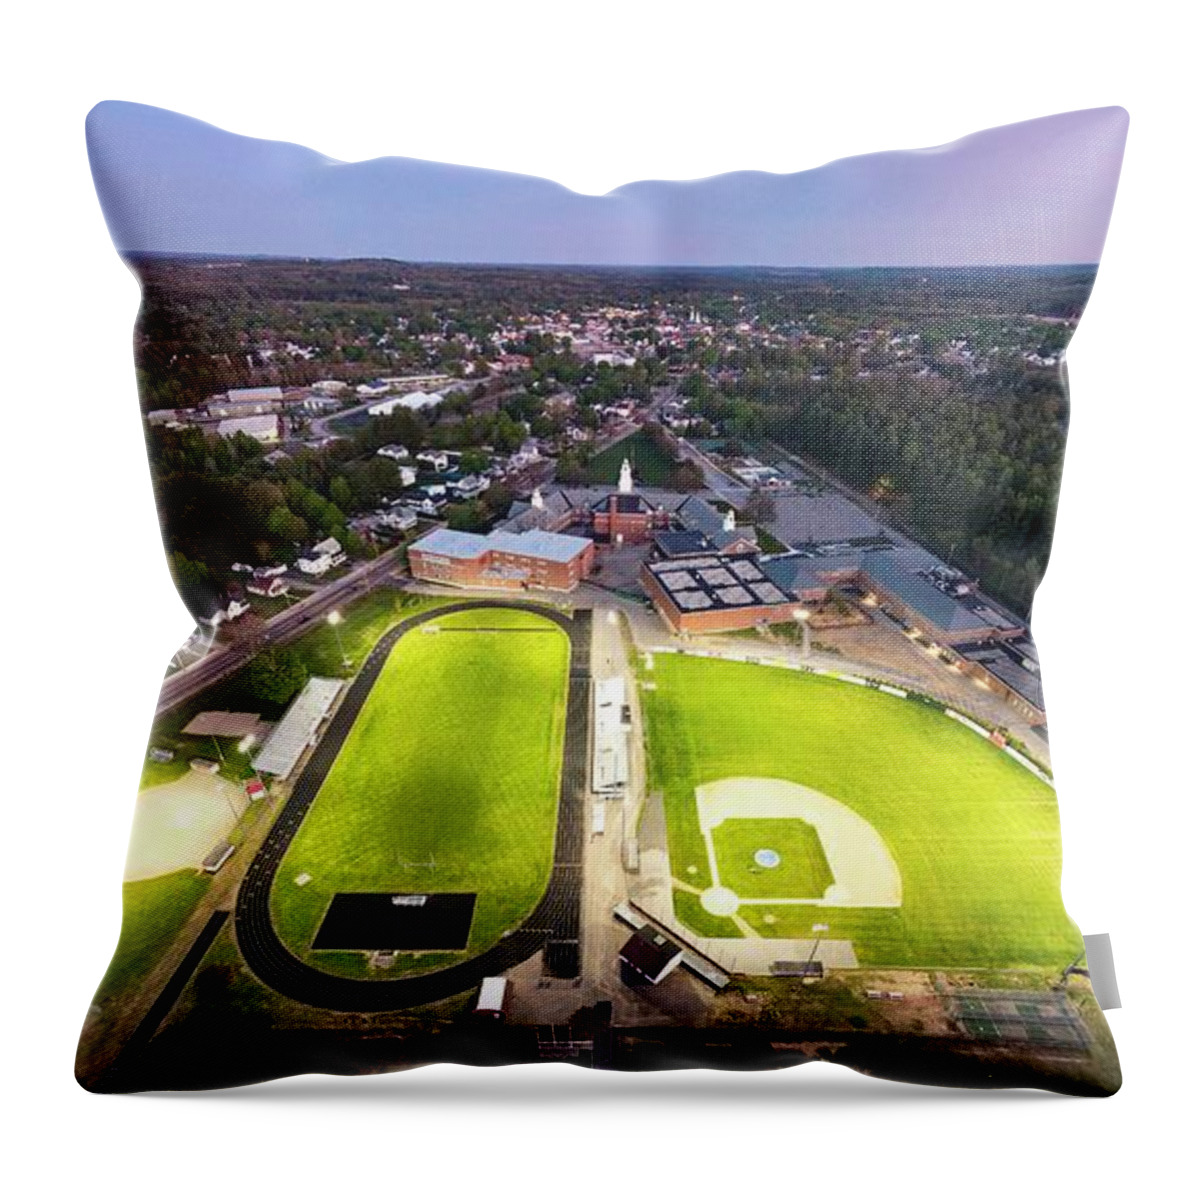  Throw Pillow featuring the photograph Spaulding #2 by John Gisis